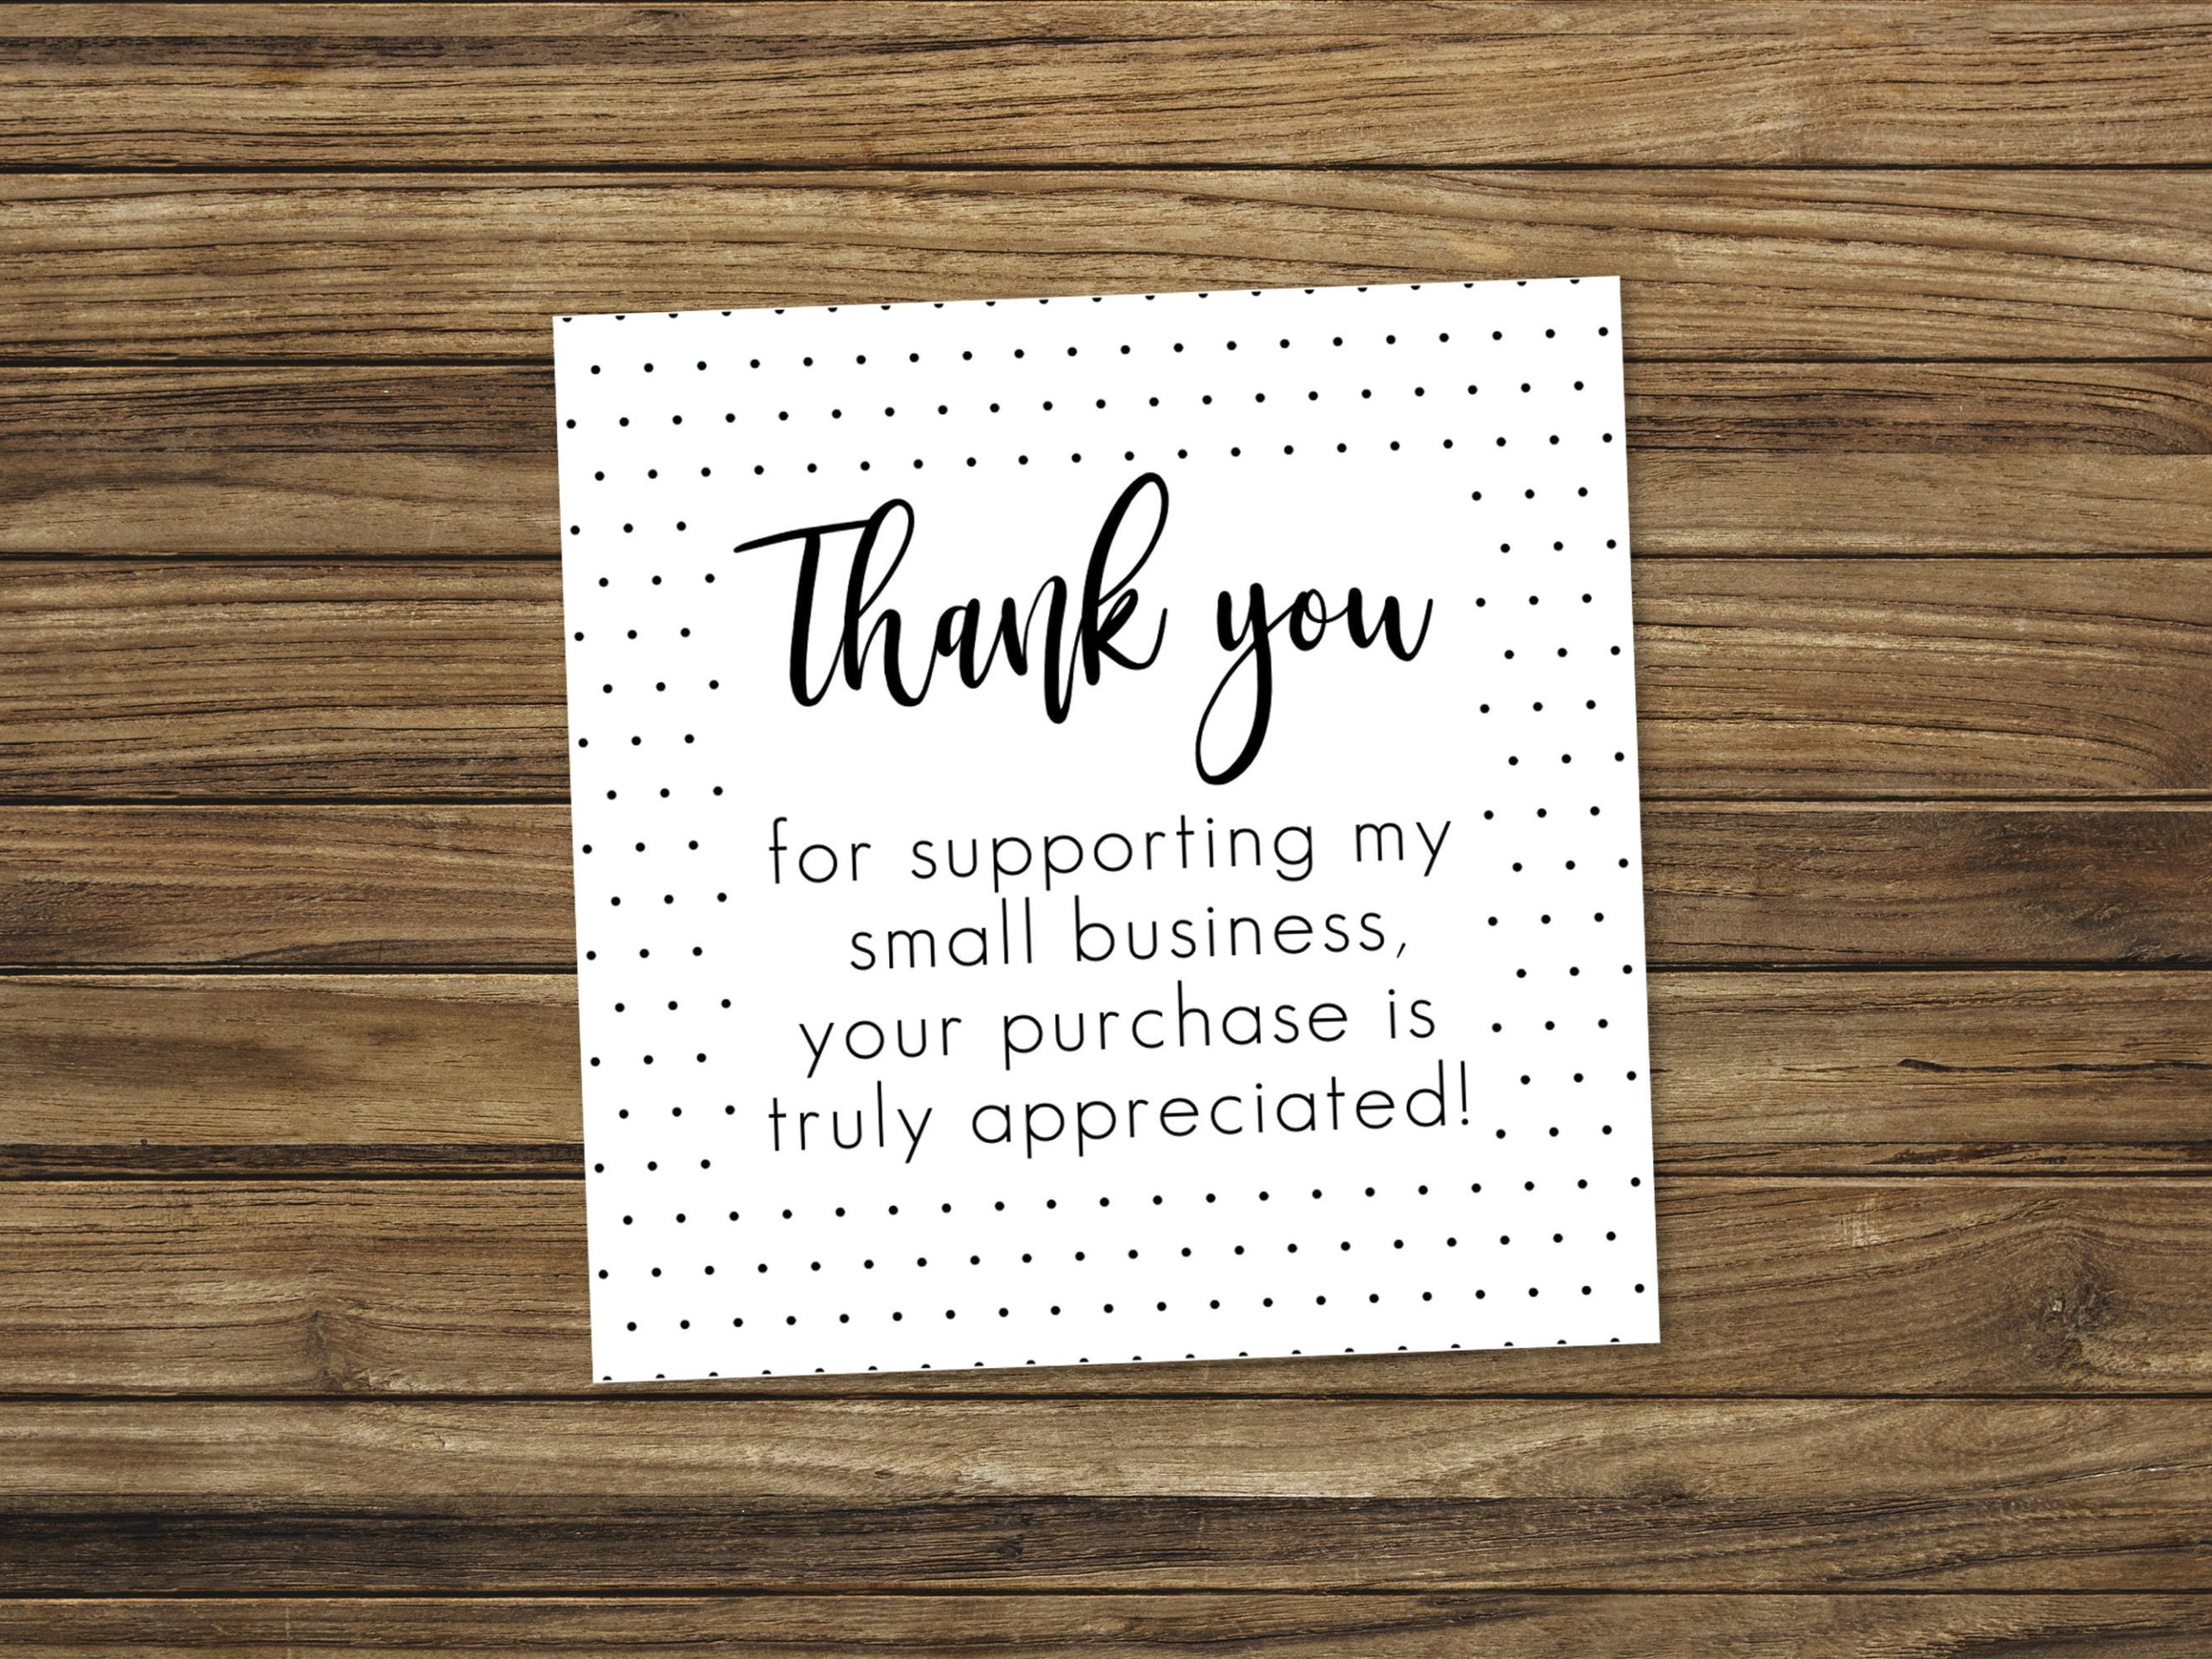 how to make thank you cards for small business 2